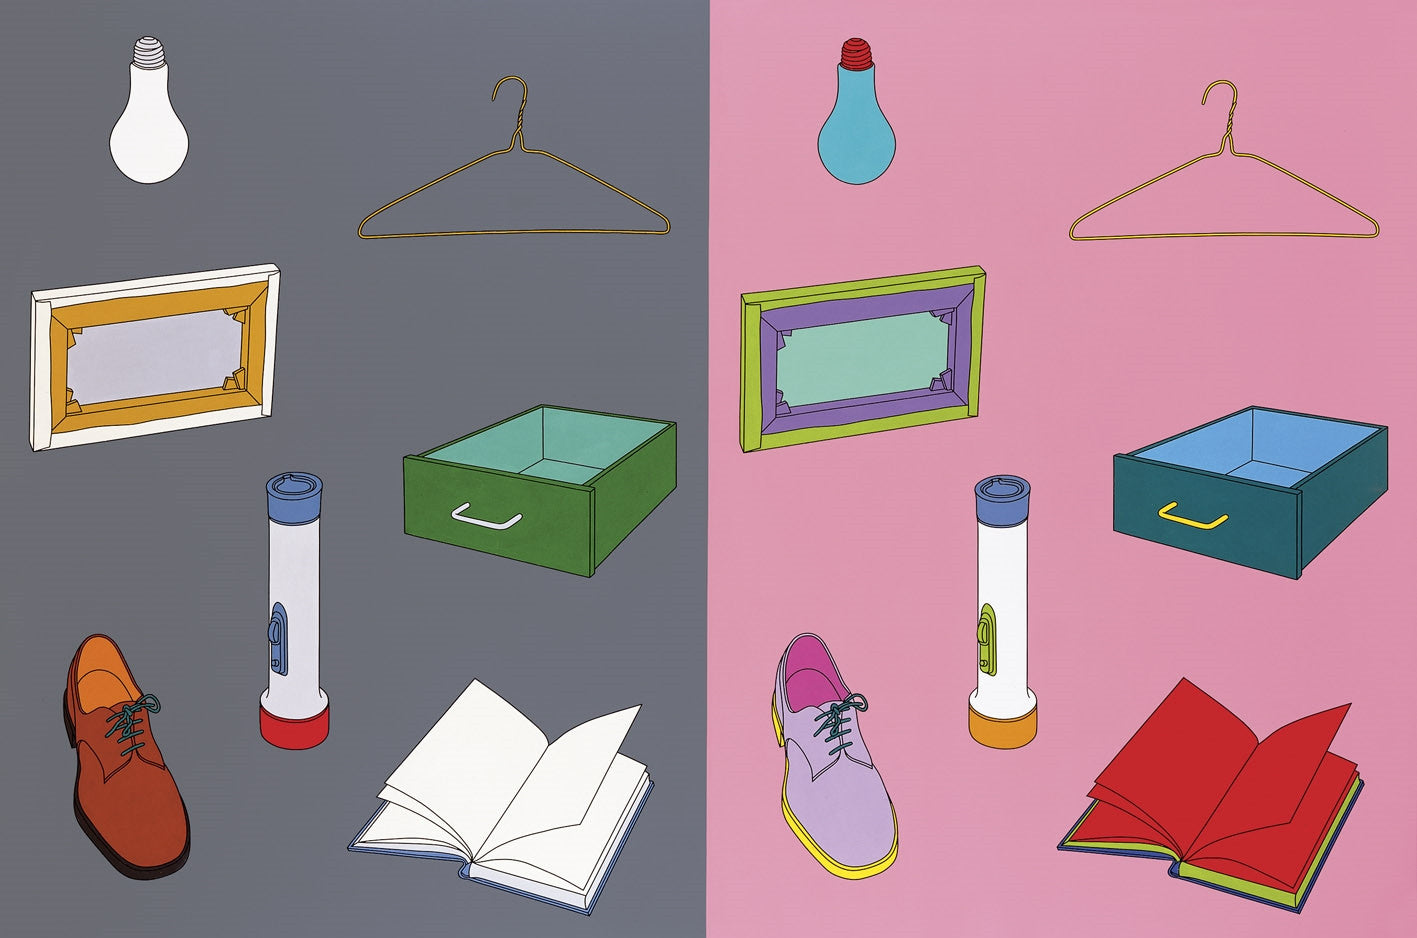 Vivid visions of everyday objects by Michael Craig-Martin